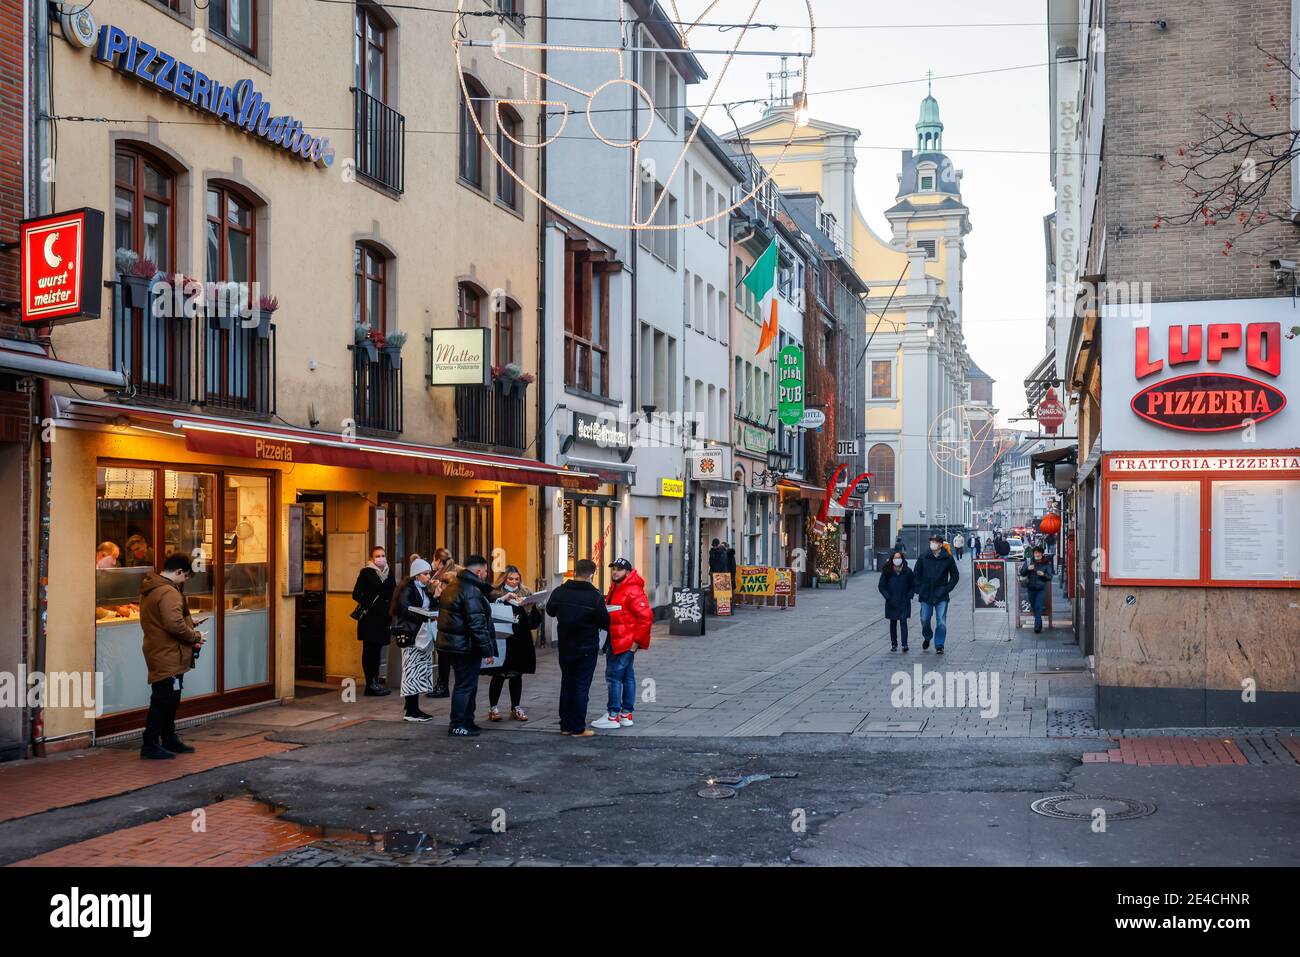 Duesseldorf, North Rhine-Westphalia, Germany - Empty old town of Duesseldorf with Santa Claus in times of the corona crisis during the second part of lockdown, passers-by eat their takeaway pizza on the street. Stock Photo